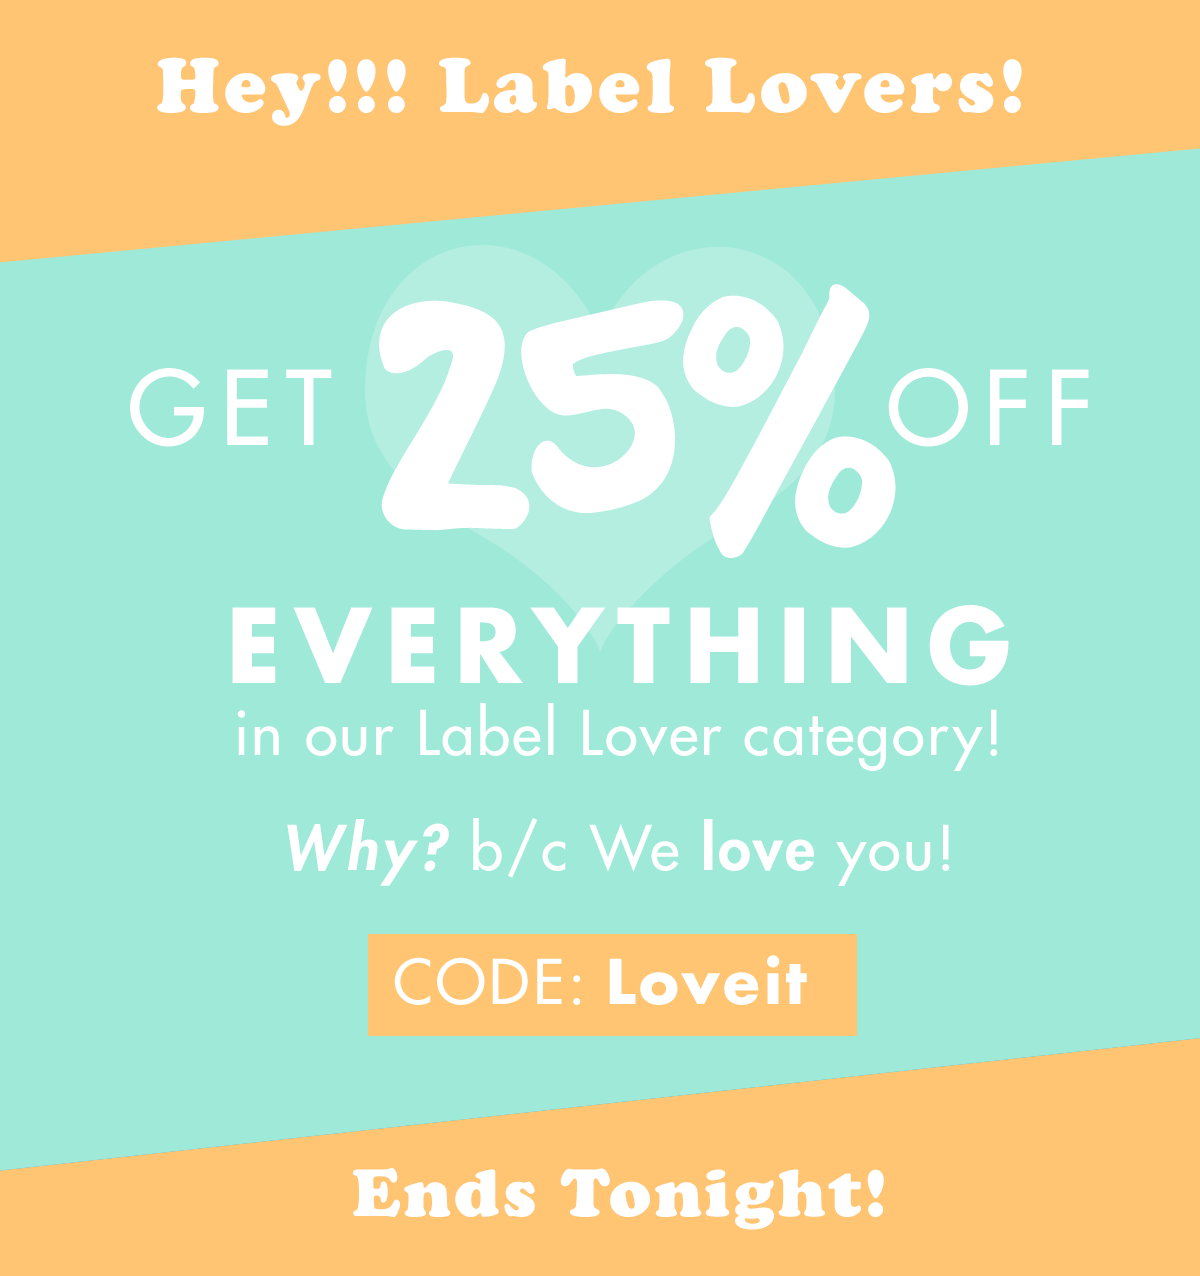 Get 25% off Our Label Love category! Use Code: LOVEIT, Ends Sunday